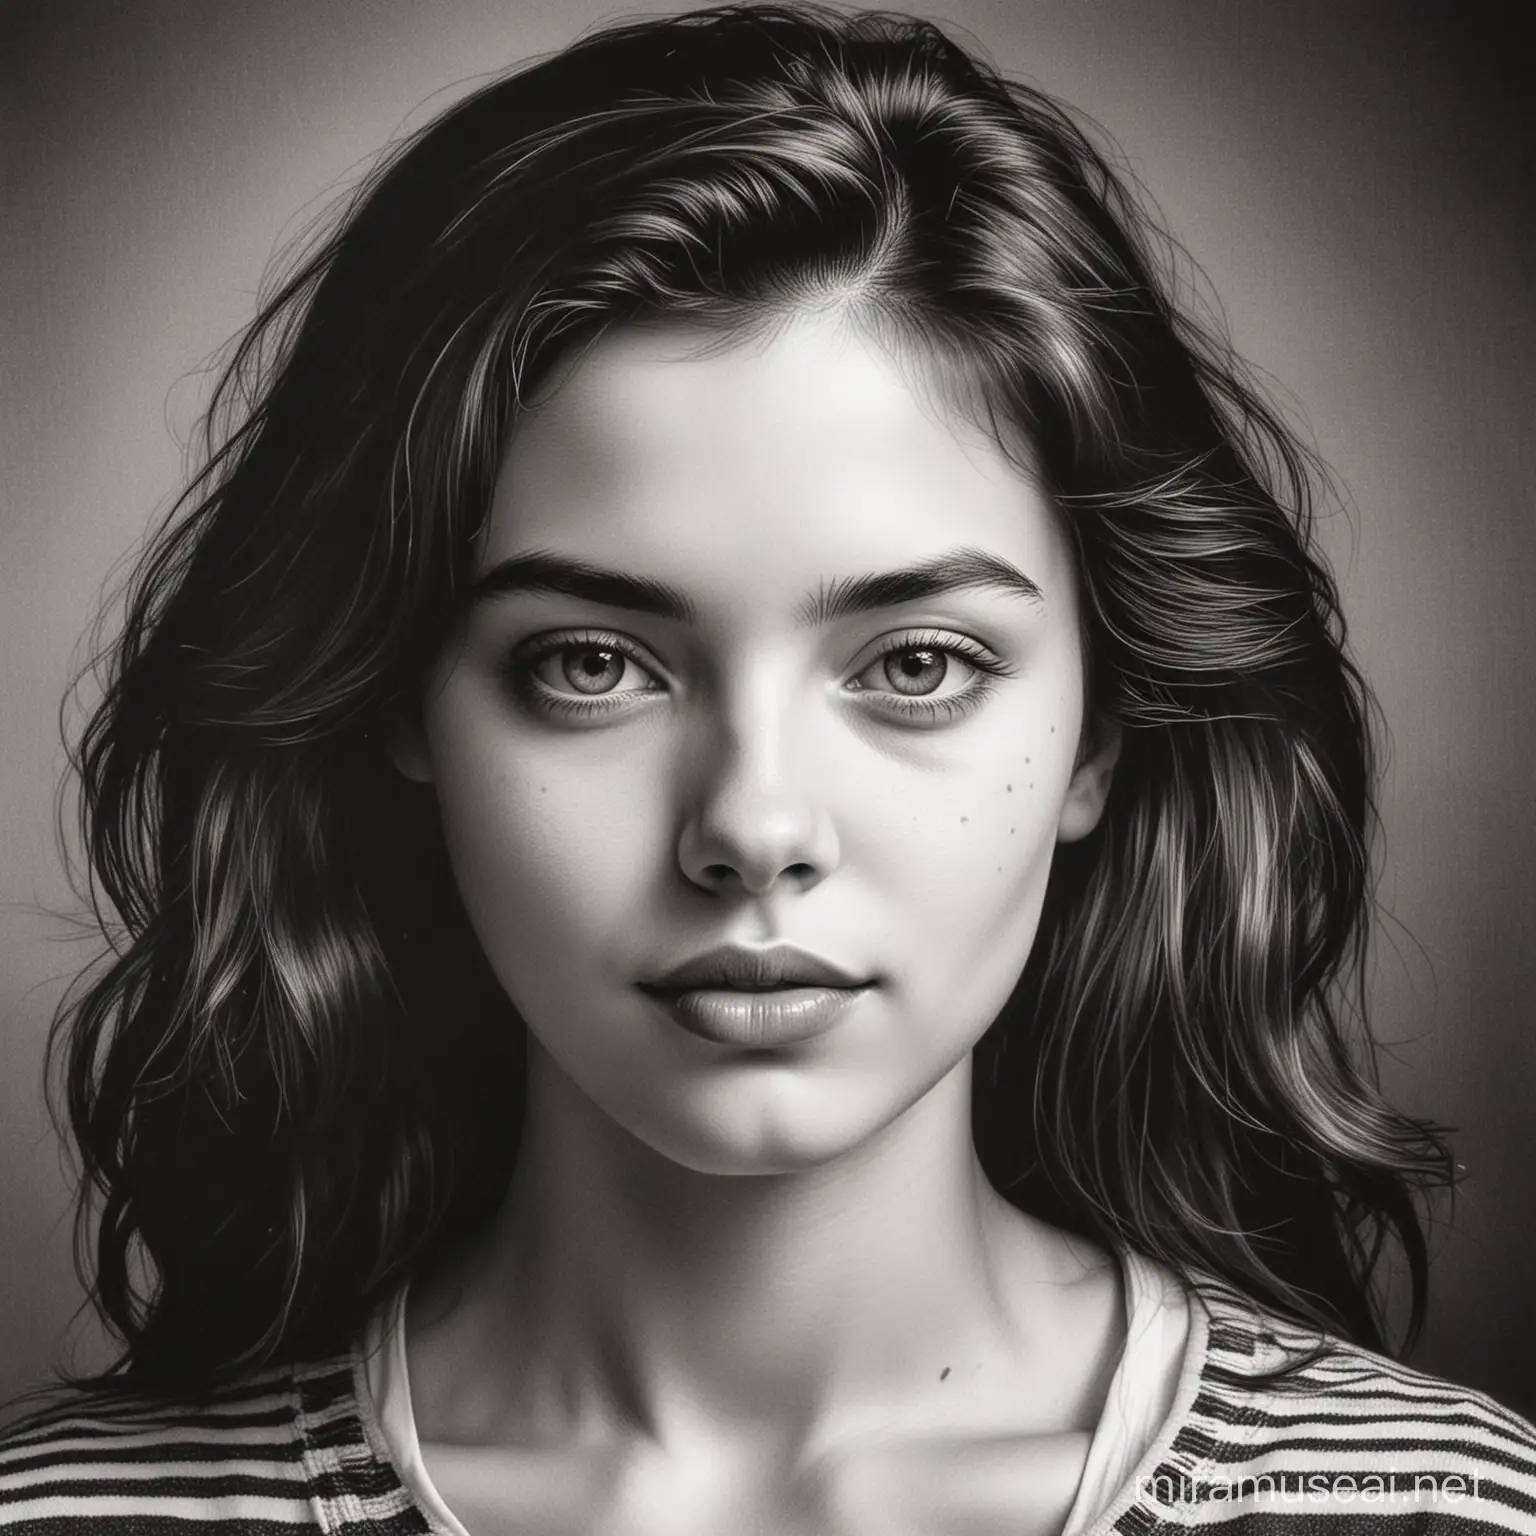 Beautiful Girl, Black and White Lithography Portrait